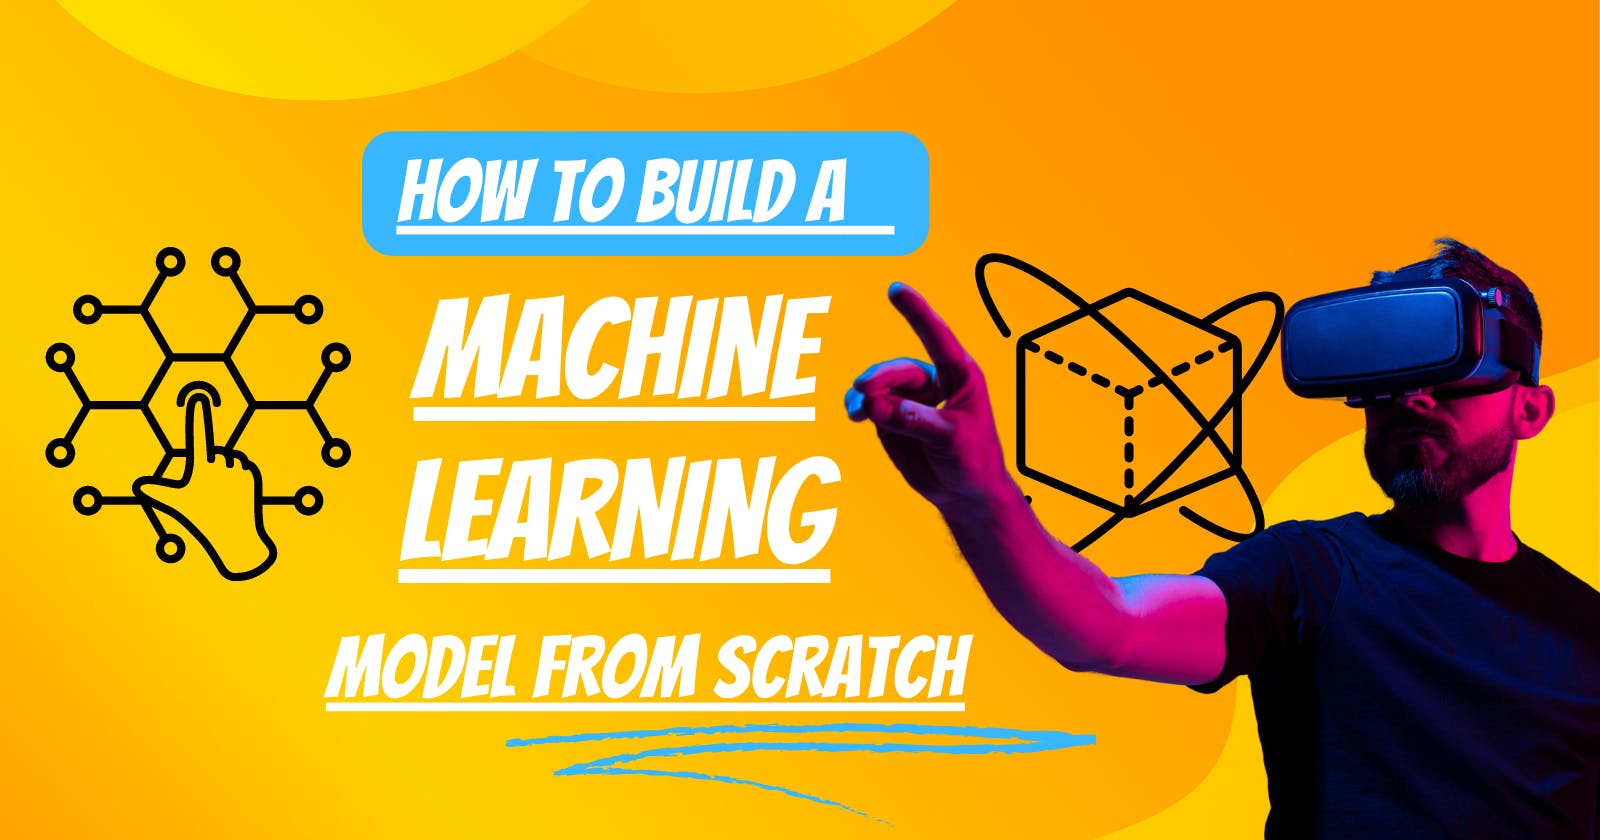 How to Build a Machine Learning Model from Scratch